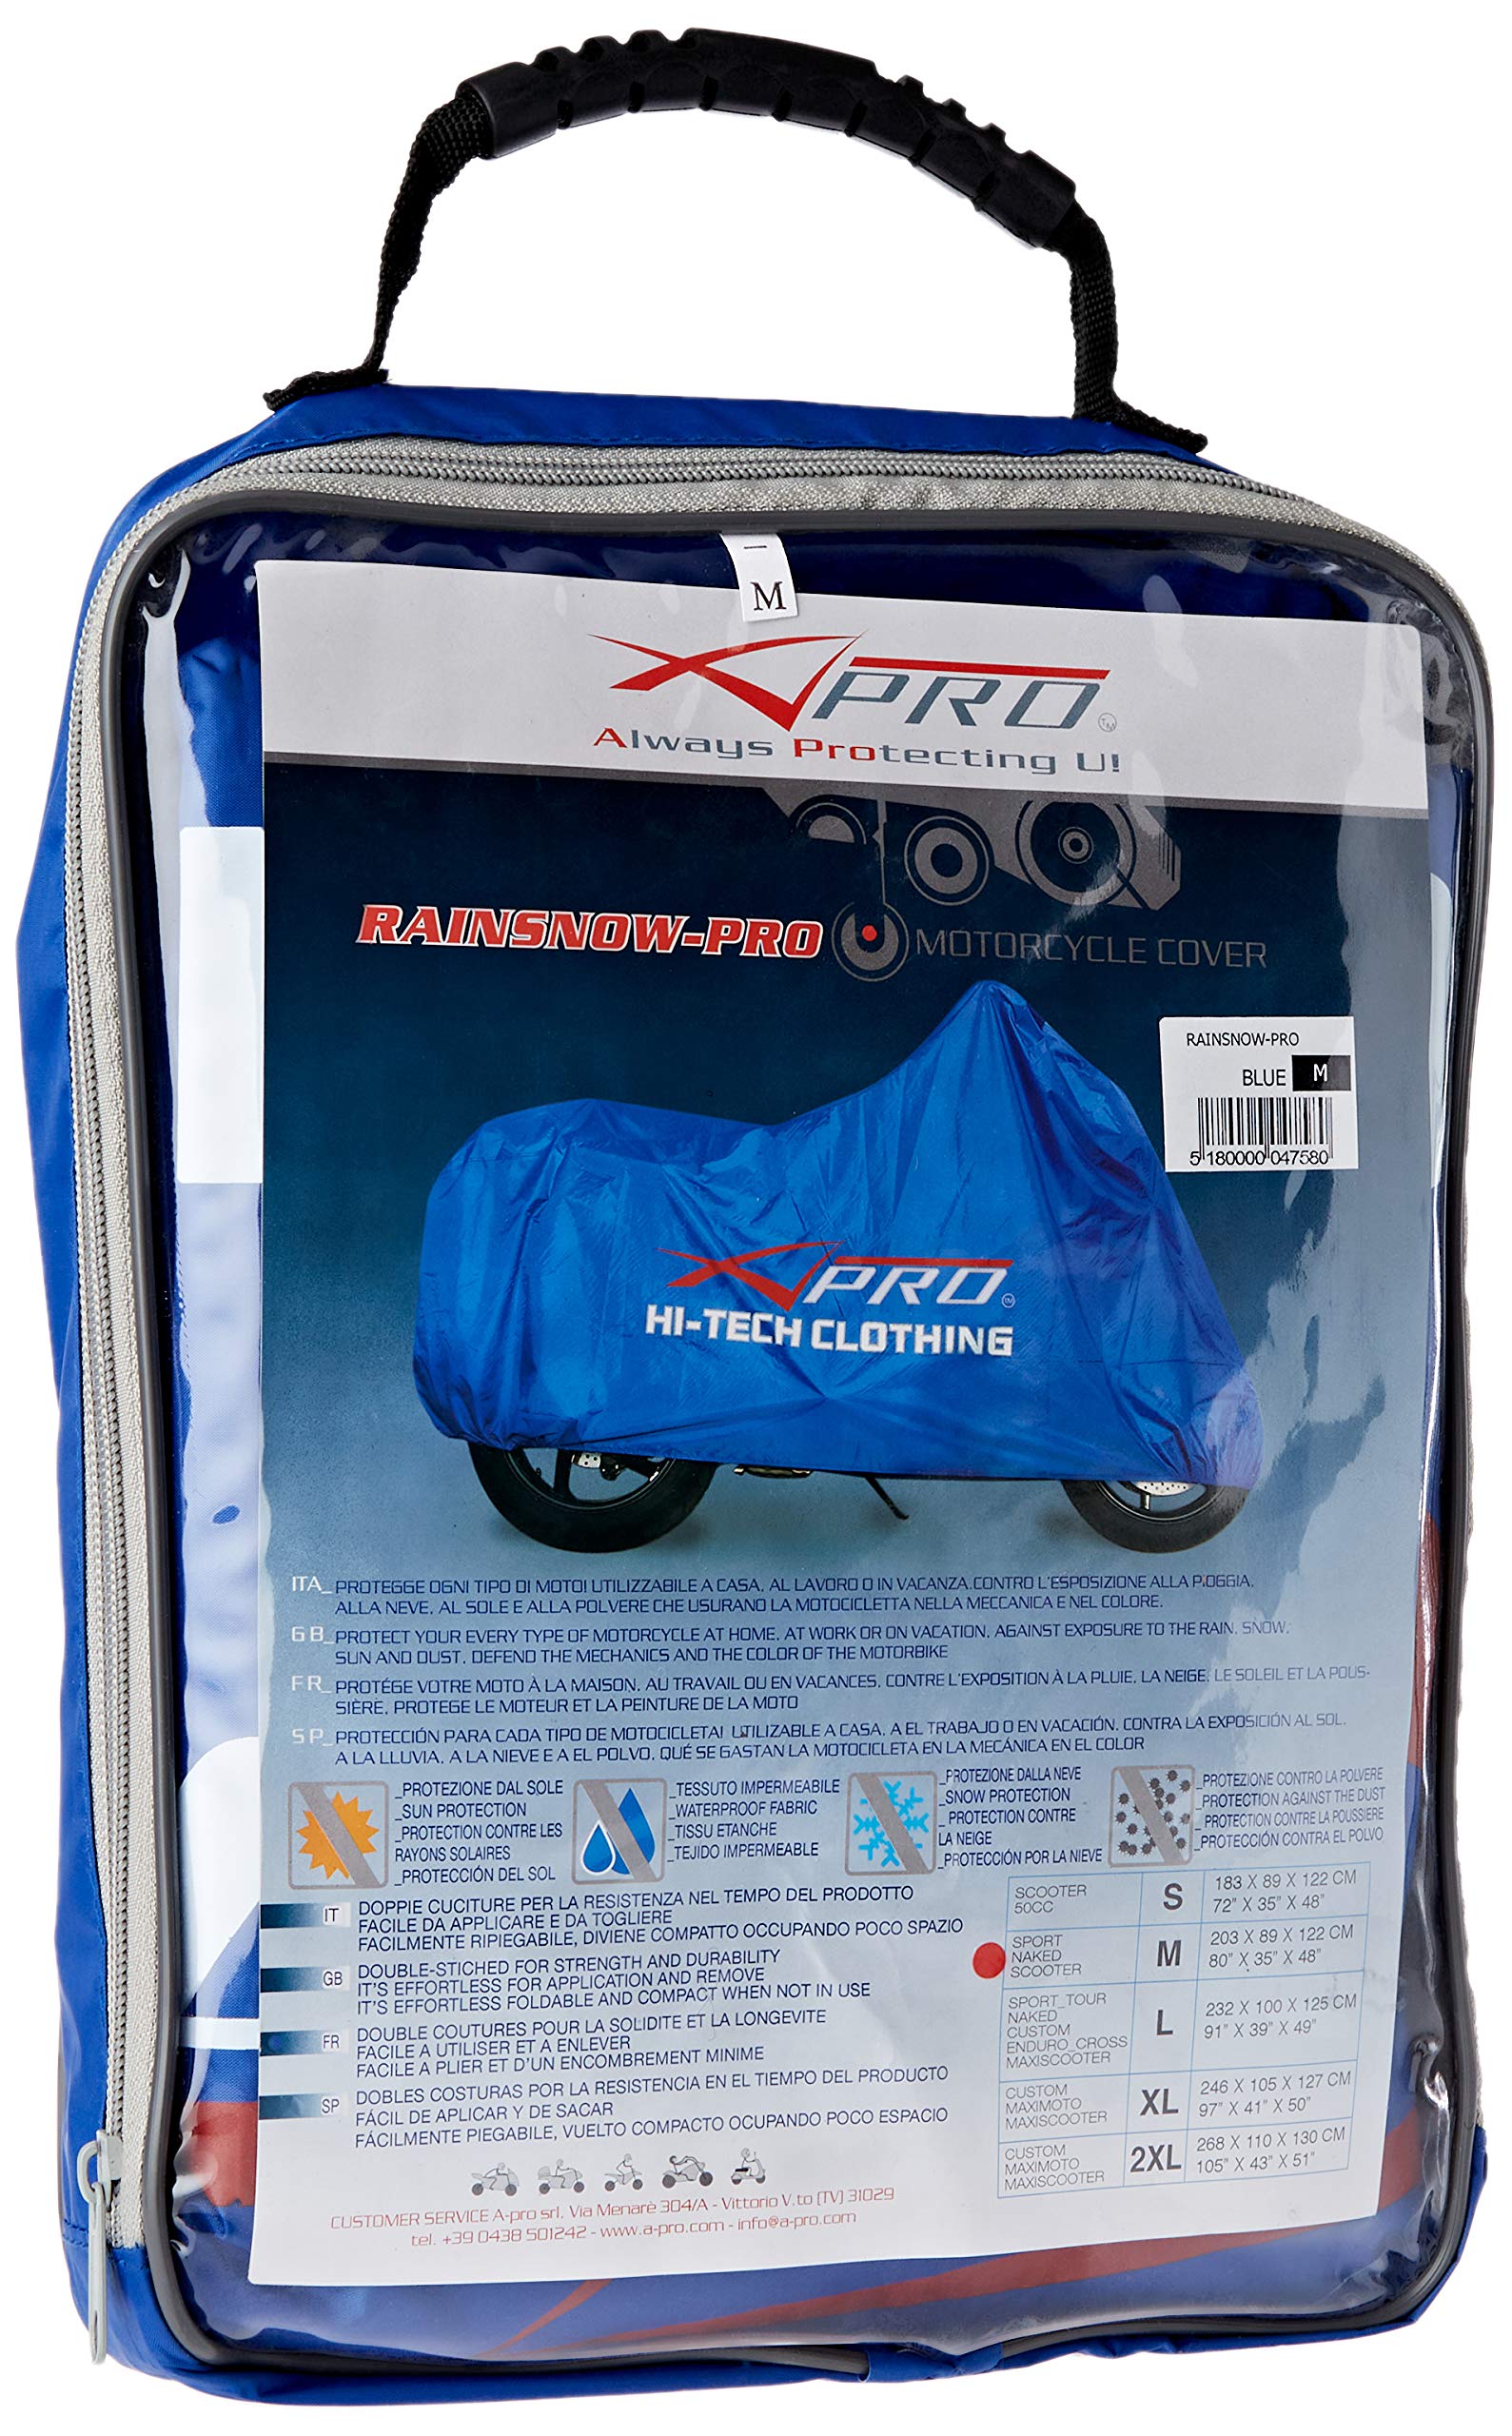 A-Pro Waterproof Rain Cover Protection Motorcycle Motorbike Scooter Bike Blue M von A-Pro